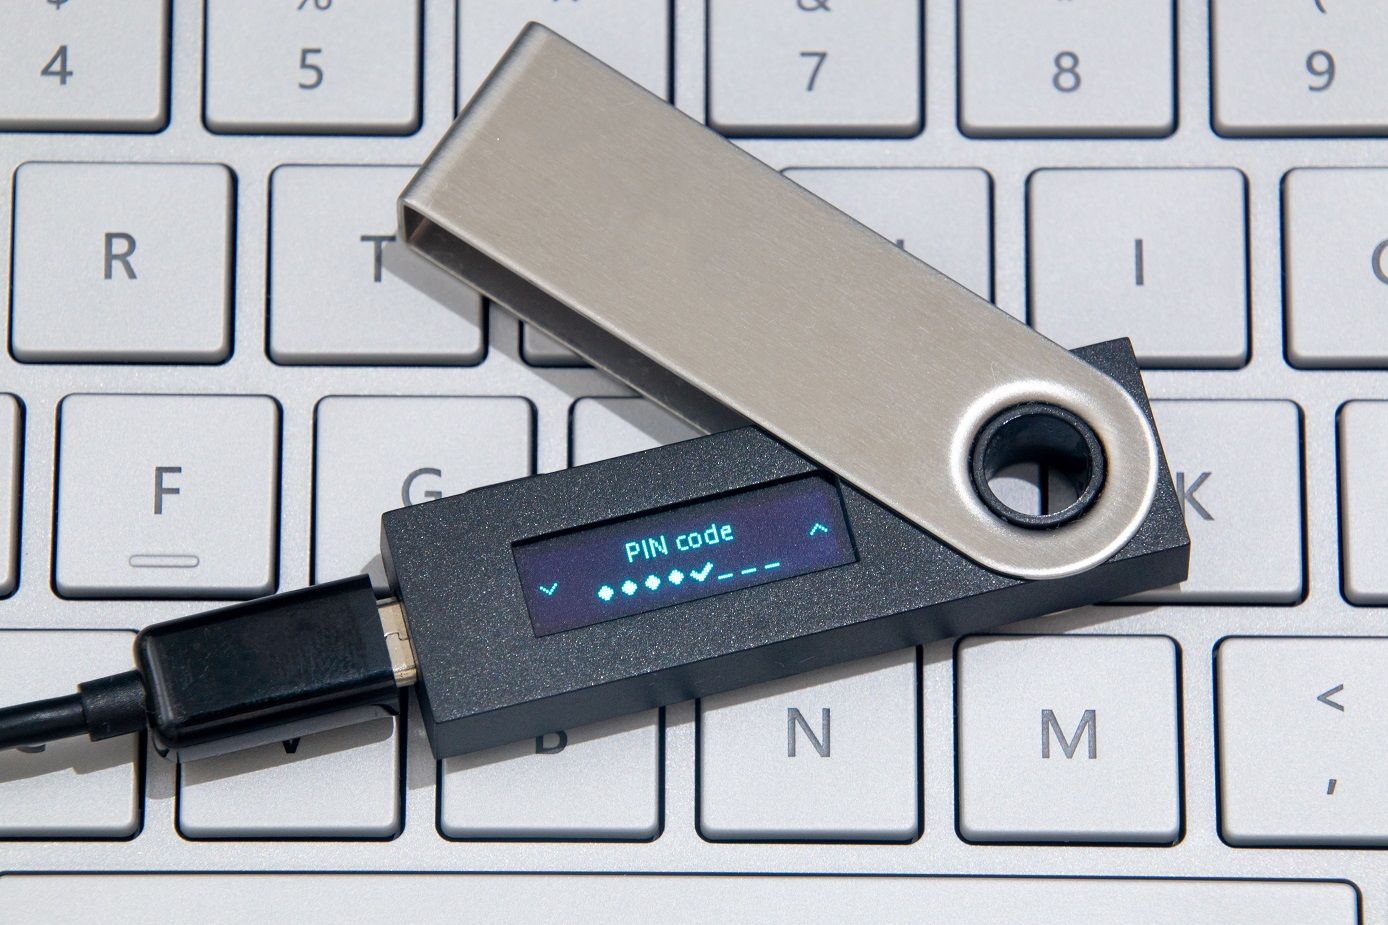 A hardware wallet for crypto lying on a laptop keyboard